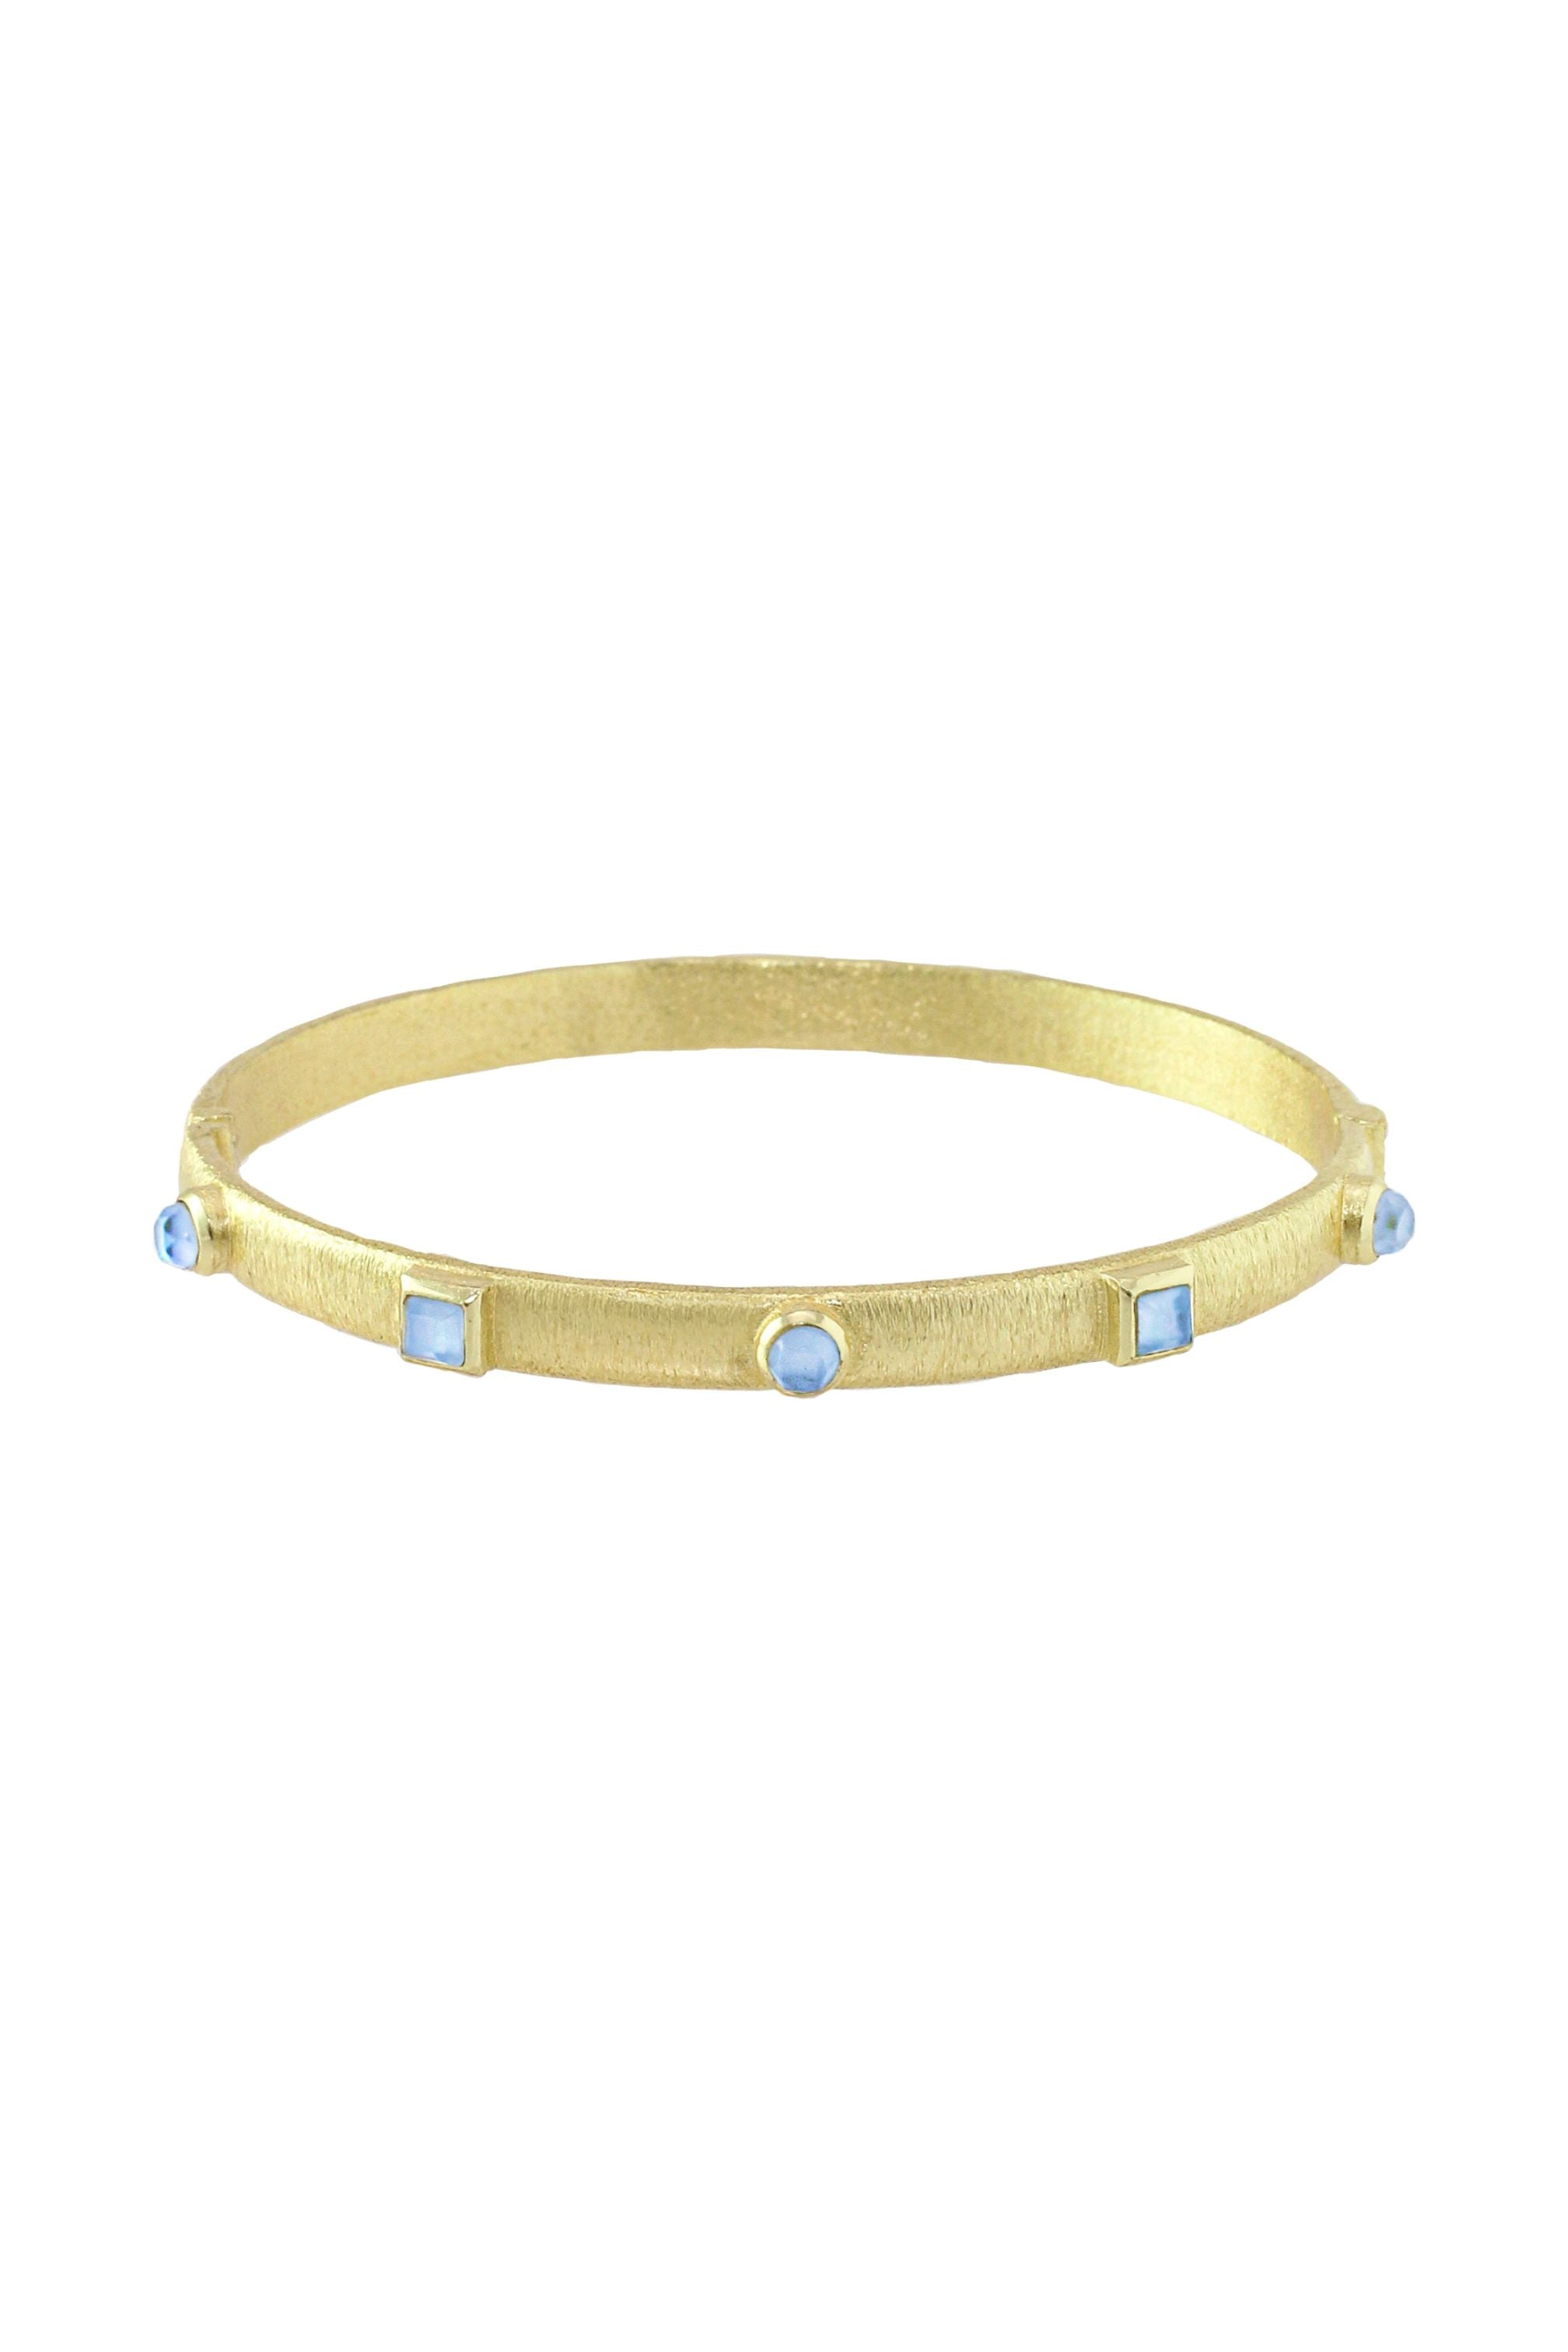 Gold bangle with blue stones